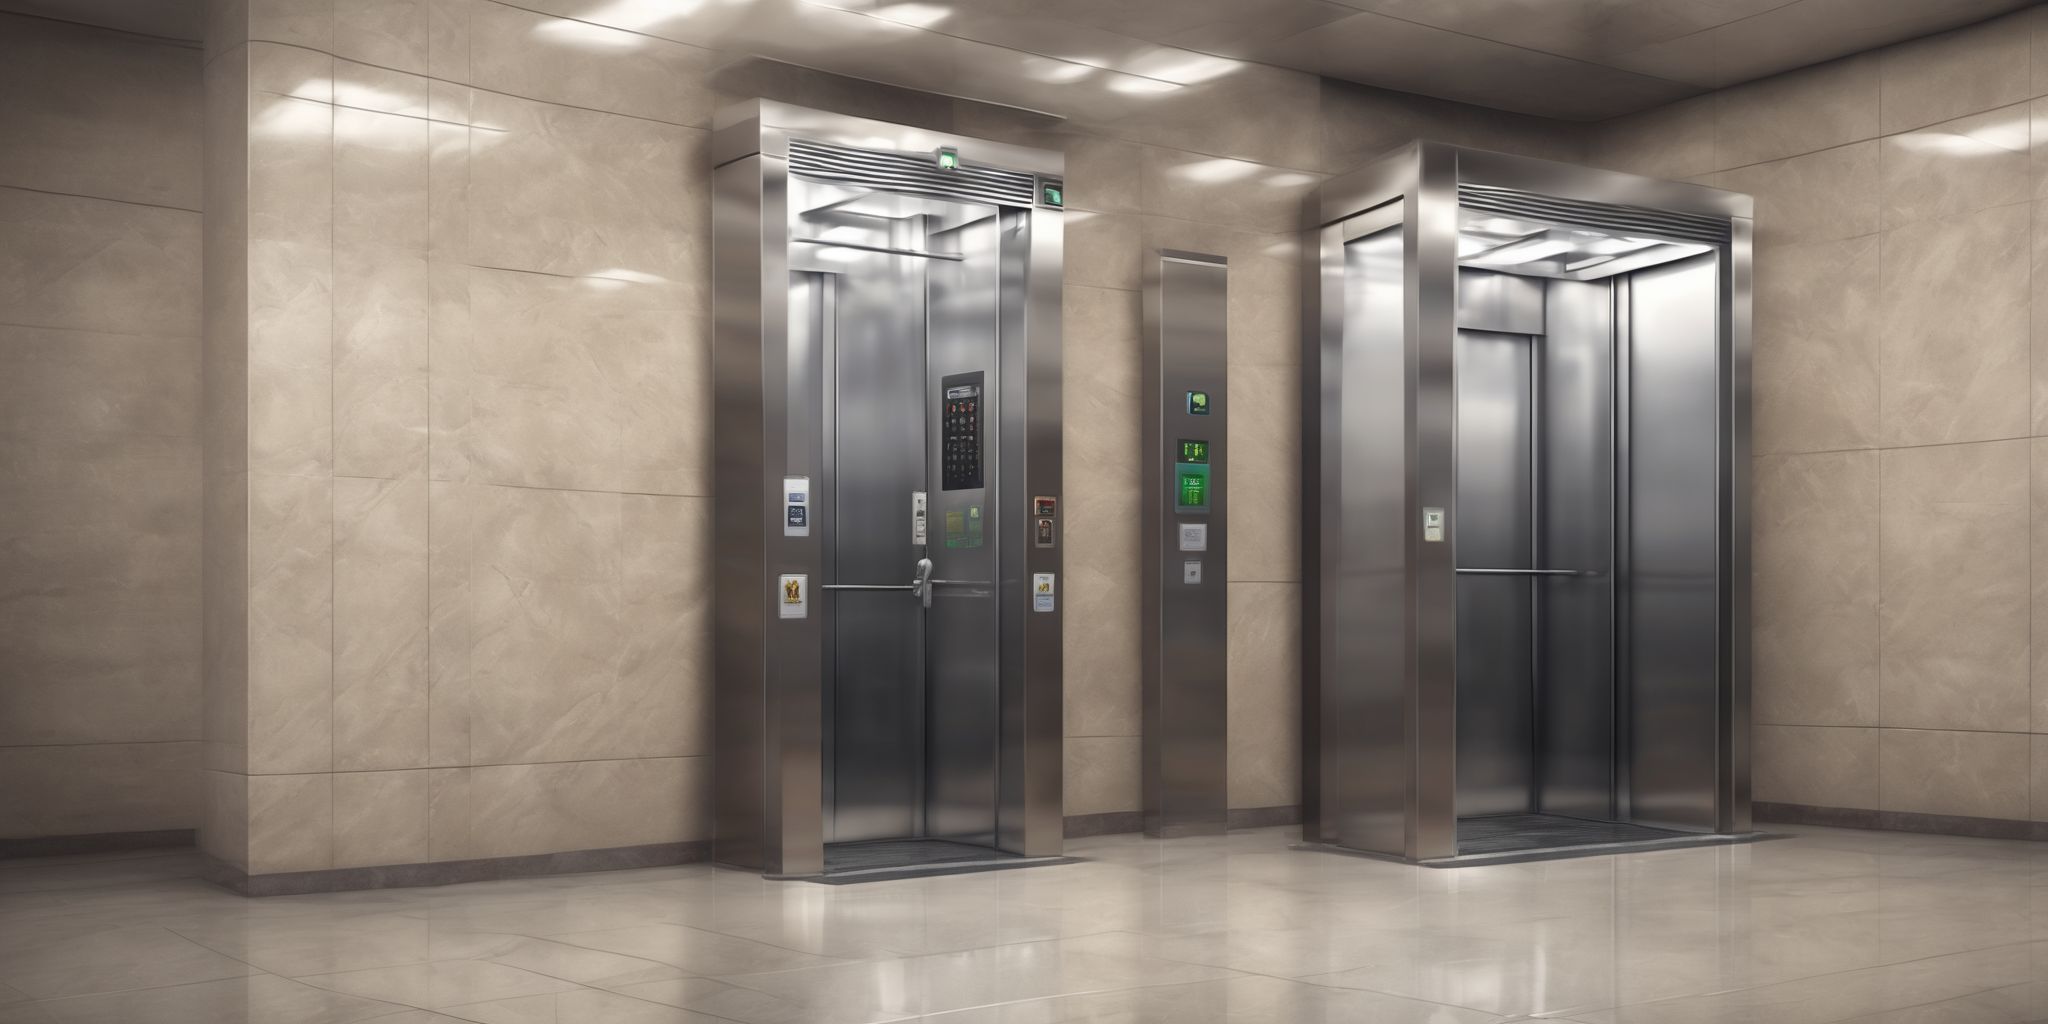 Elevator  in realistic, photographic style